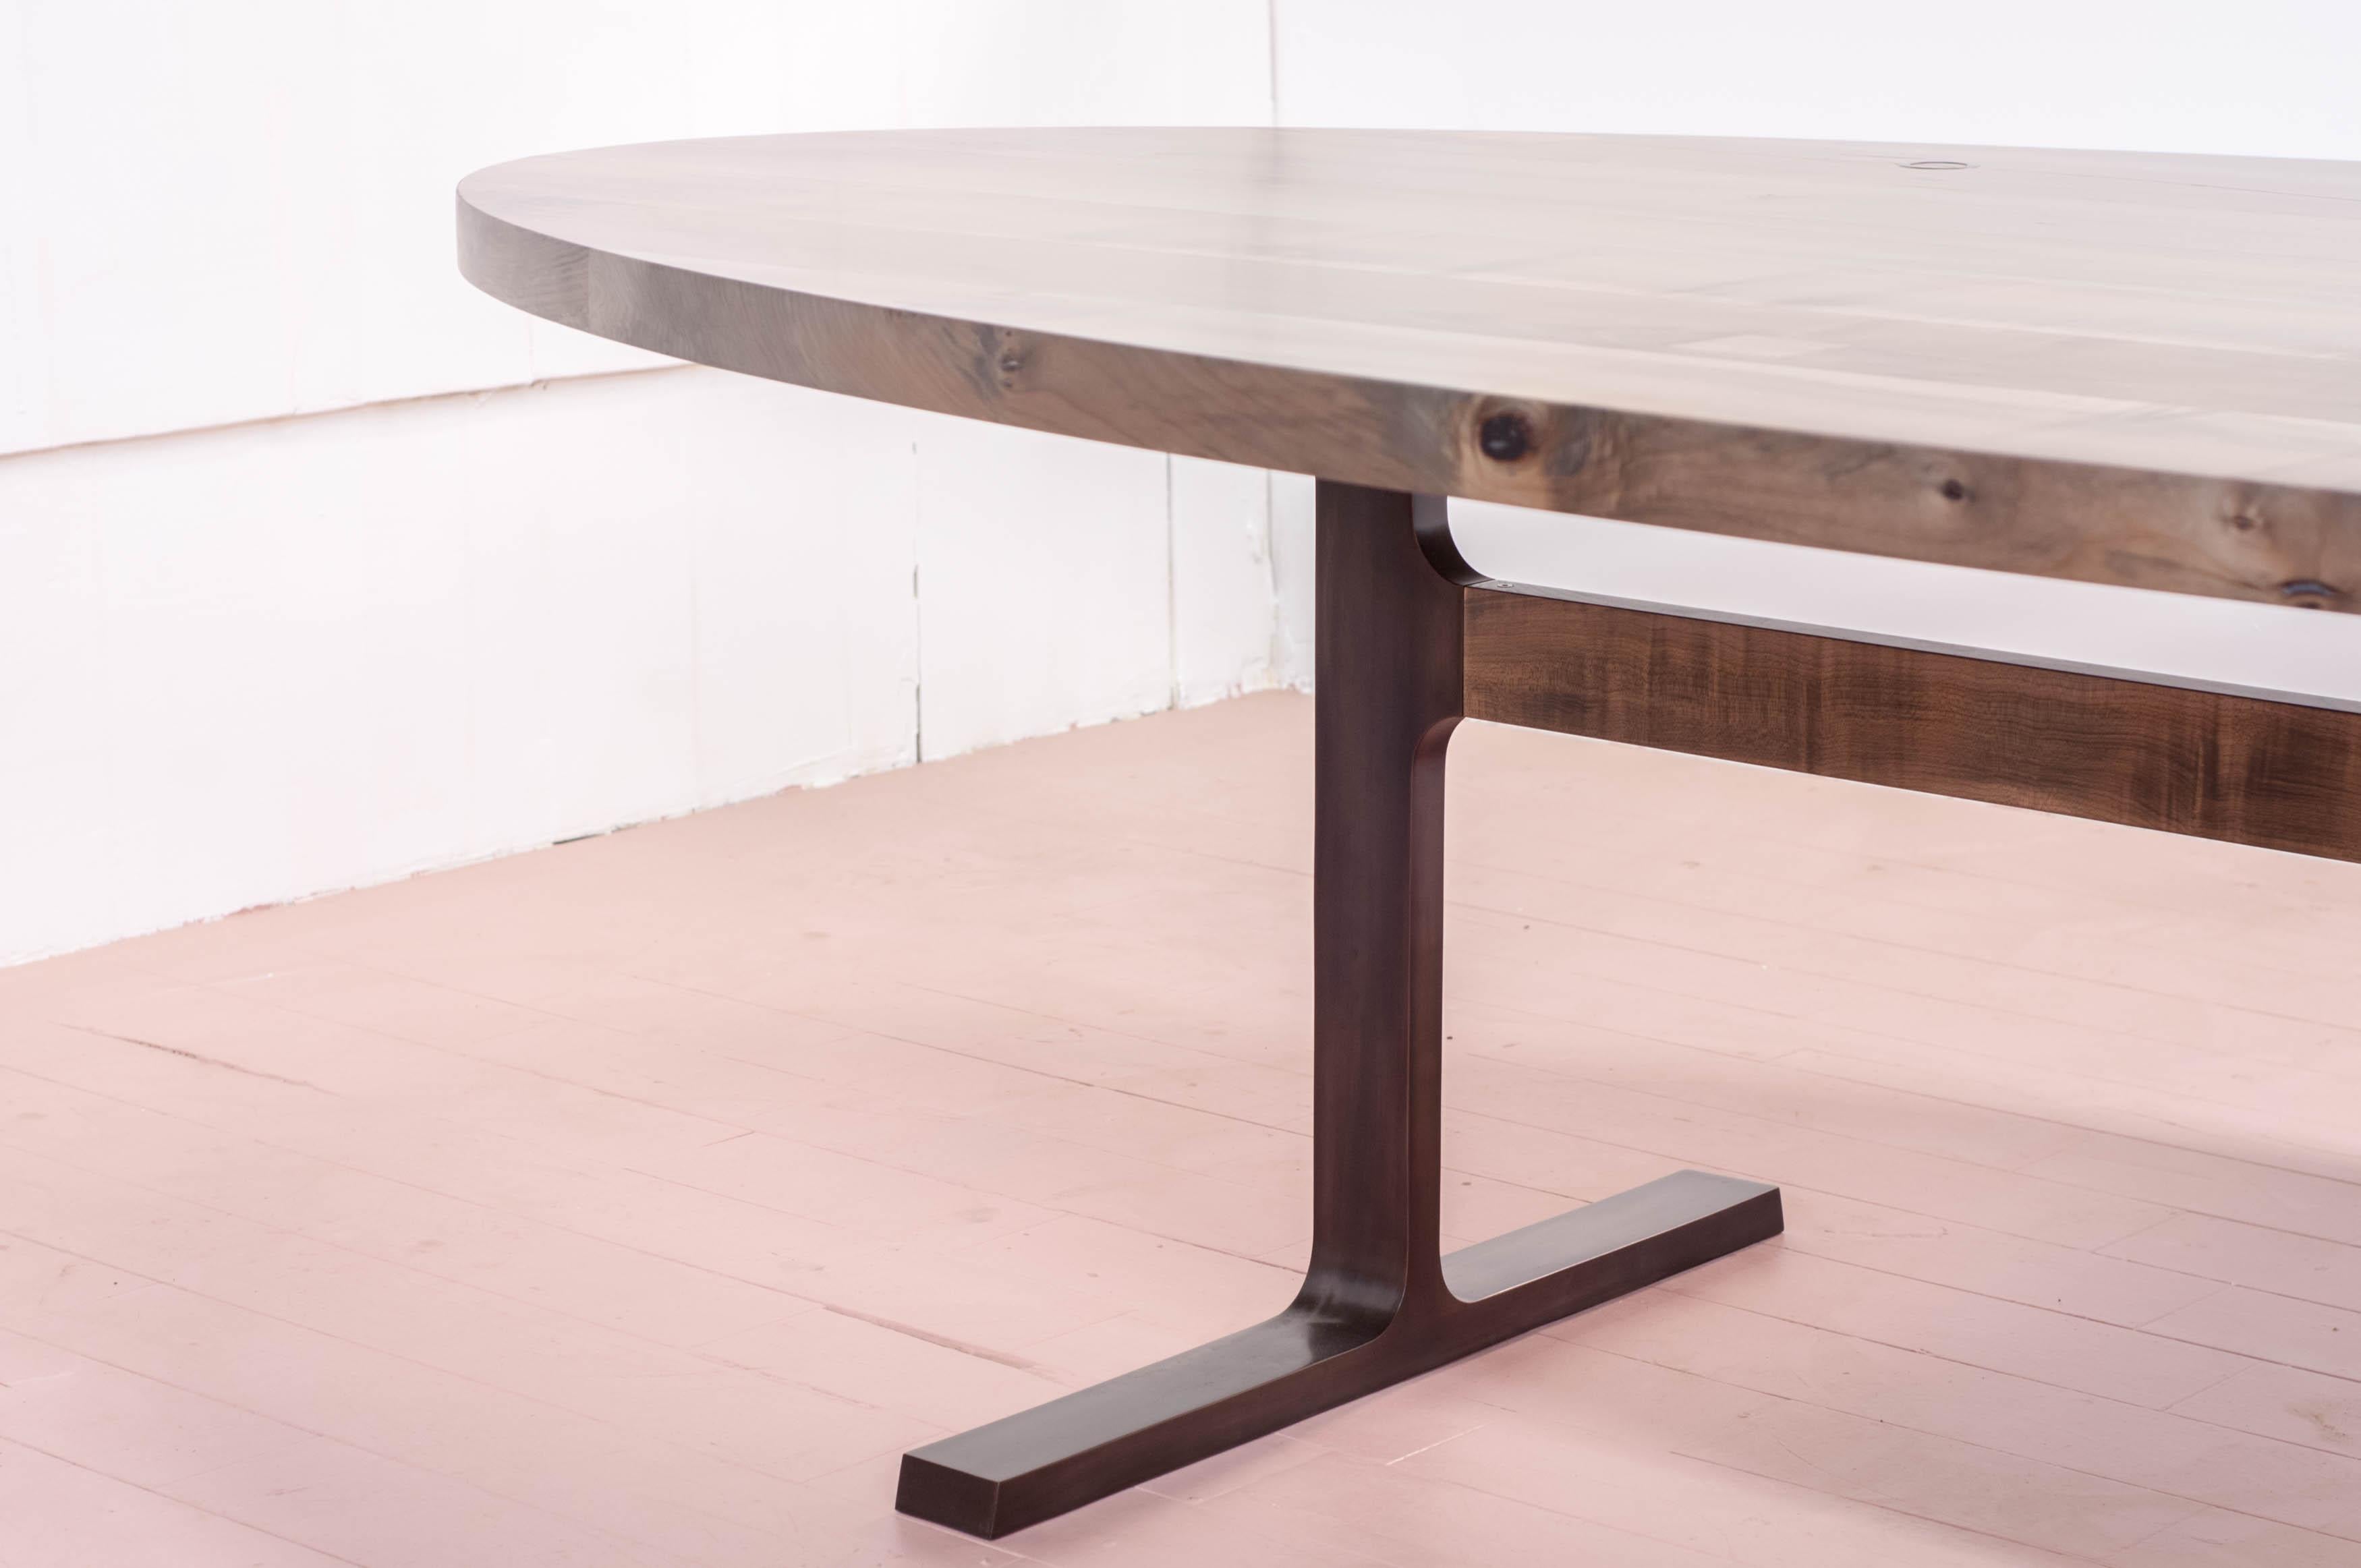 The shaker table is the first award winning design from the studio at Jeff Martin Joinery. It examines the interface between cast bronze and solid wood using bronze casting for joinery functionality. 

Distilled to its purest elements, the bronze